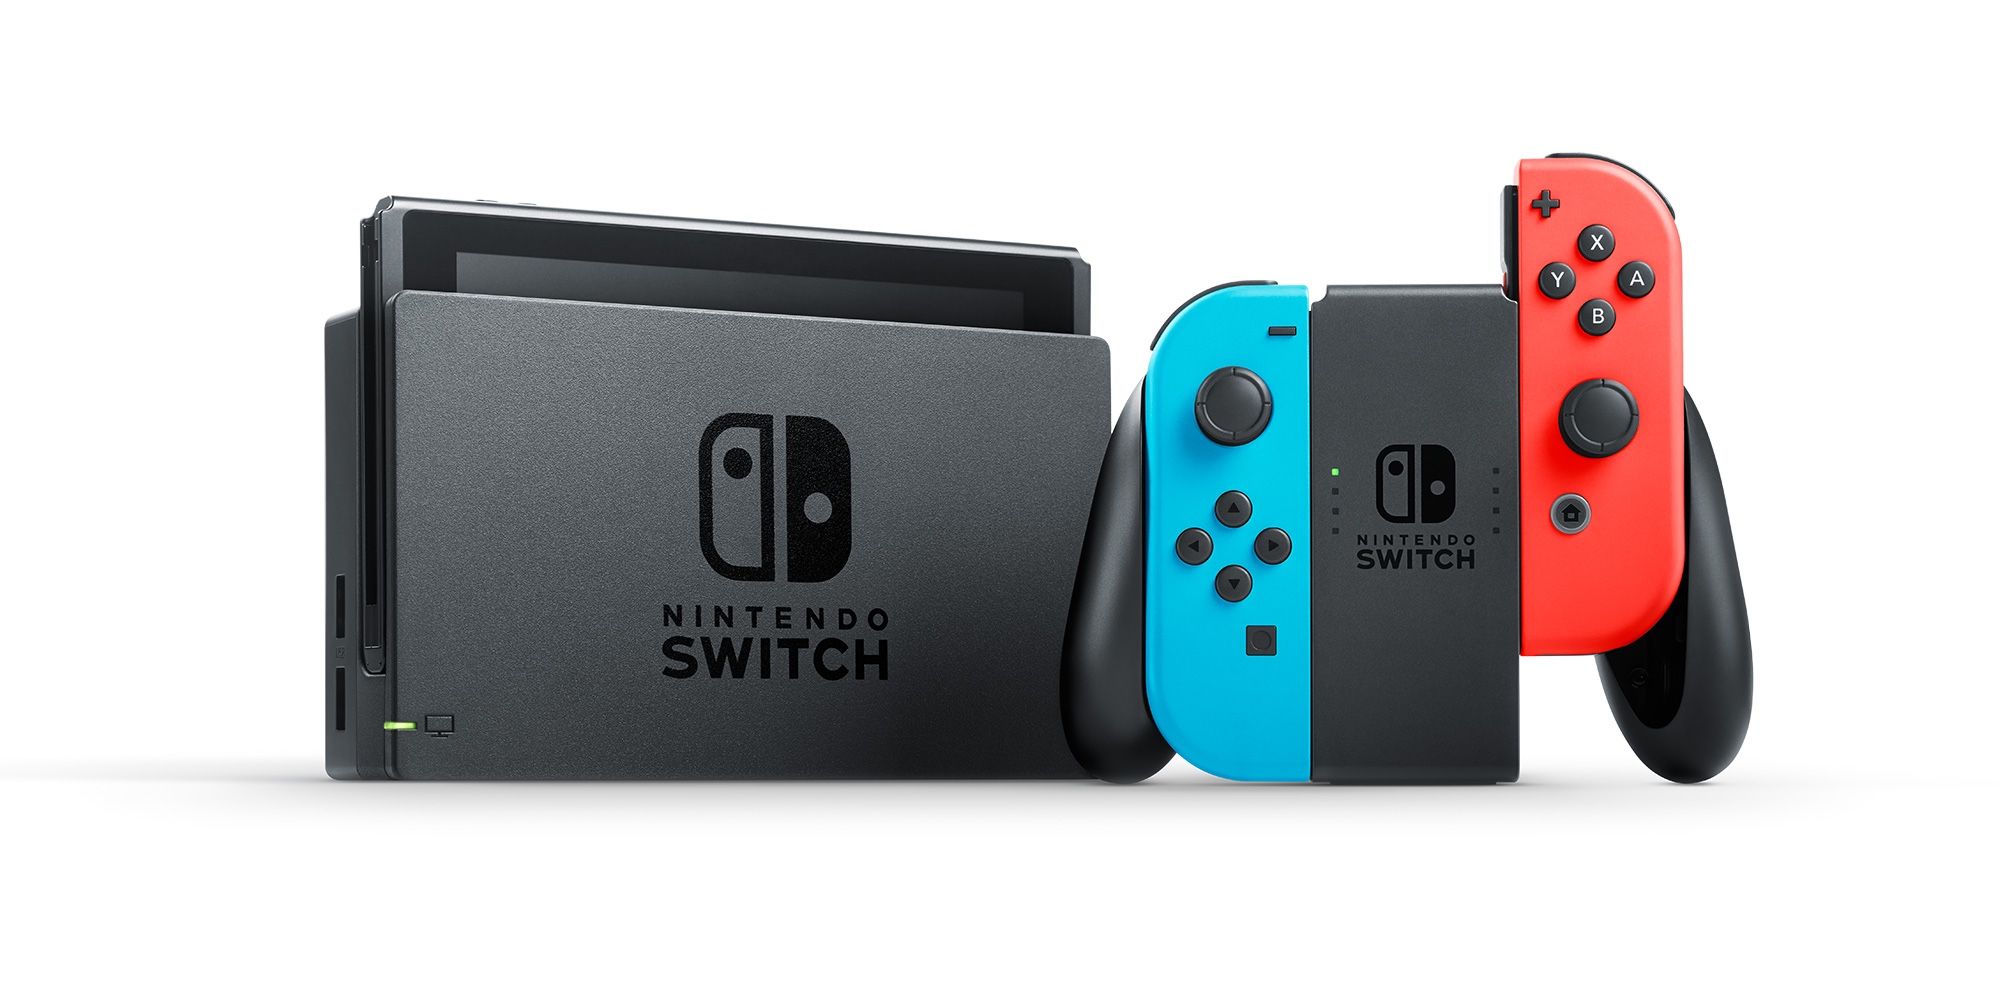 Nintendo Switch Was The Best Selling Console In The US For The First Half Of 2021